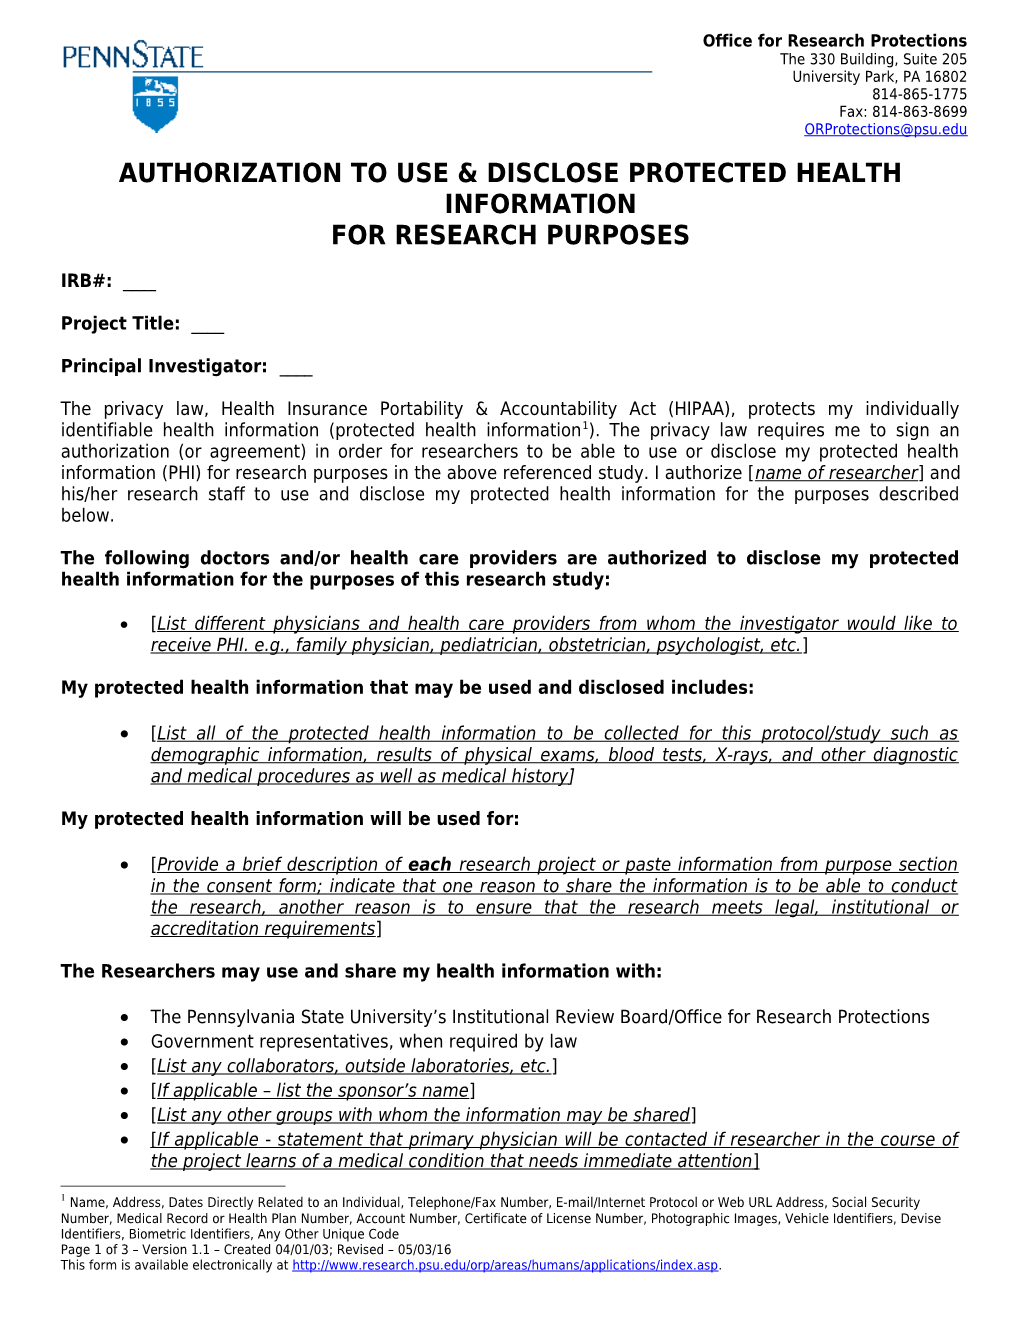 Authorization to Use & Disclose Protected Health Information